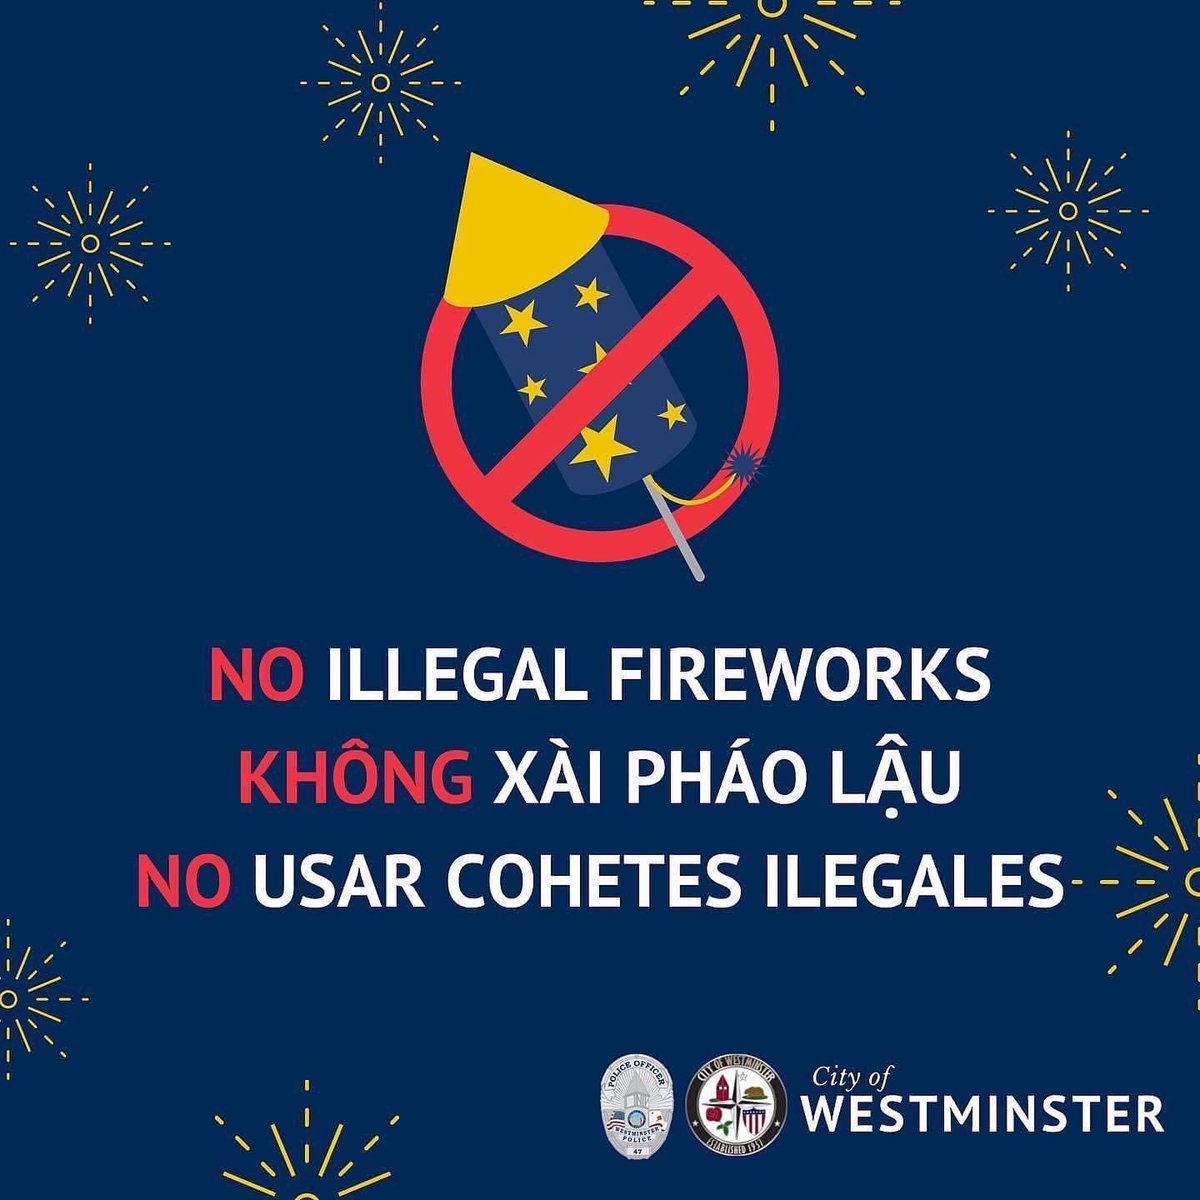 The holidays are here 🎄 Please do not call 9-1-1 to report illegal fireworks! Leave 9-1-1 lines open for emergencies. Instead, try: 💻 westminster-ca.gov/fireworks ☎️call the fireworks hotline, 714-898-3315 x 4686 📲download the City’s app (available for iPhone/Android).